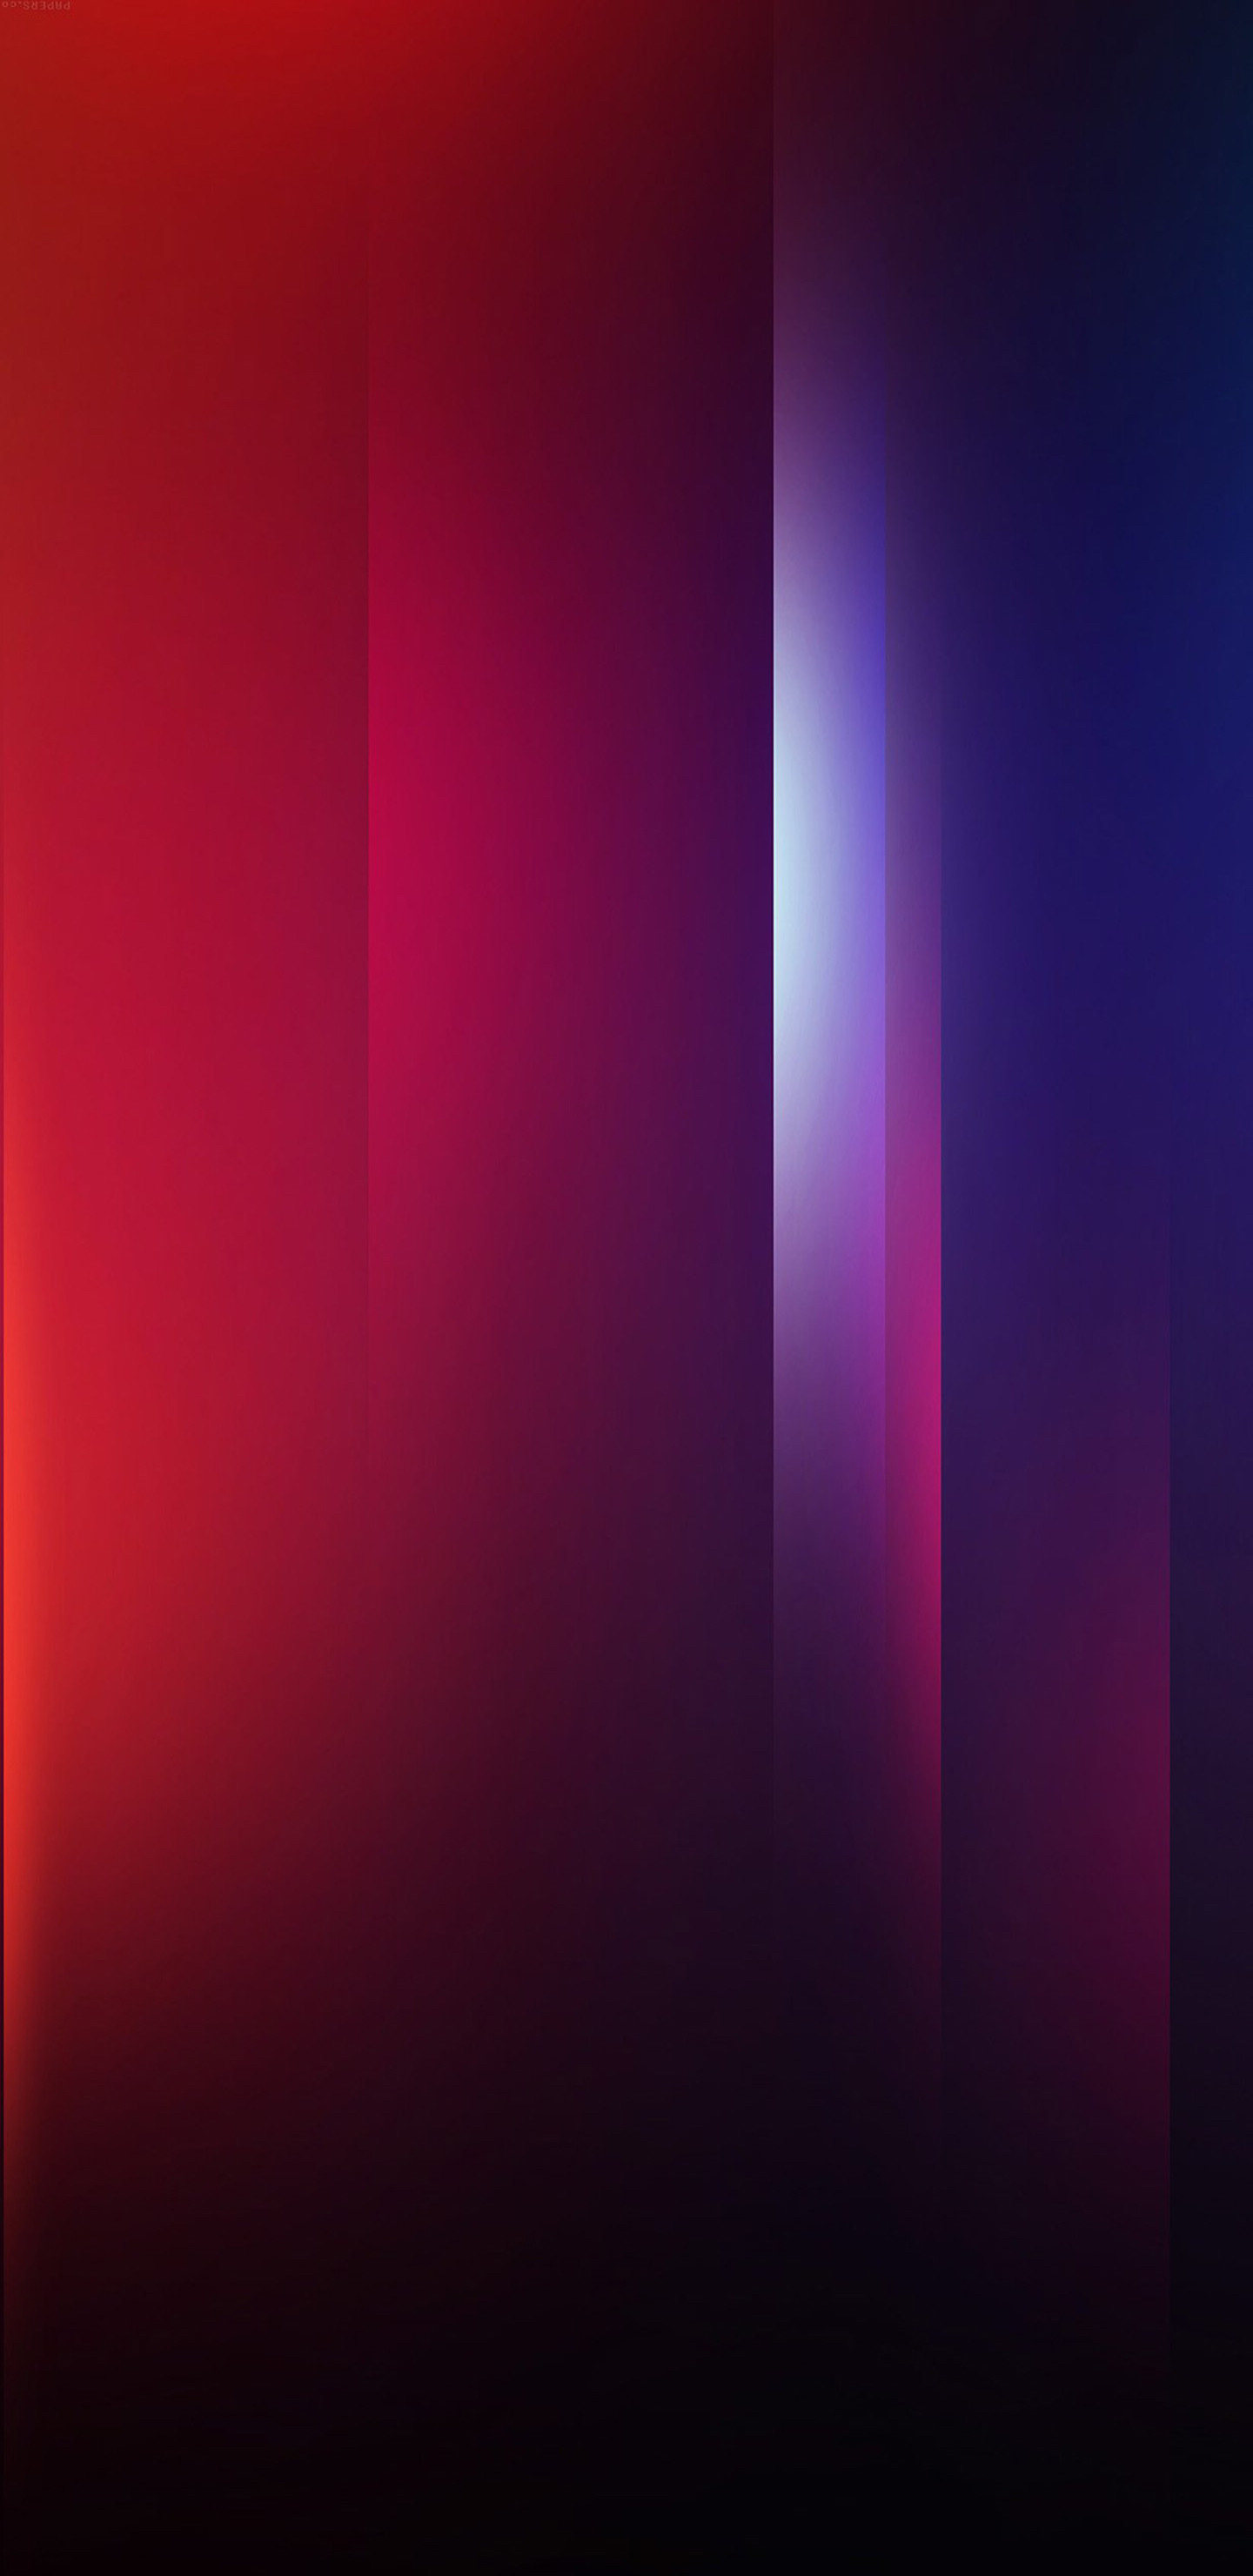 Blue, red, purple, minimal, abstract, wallpaper, galaxy, clean